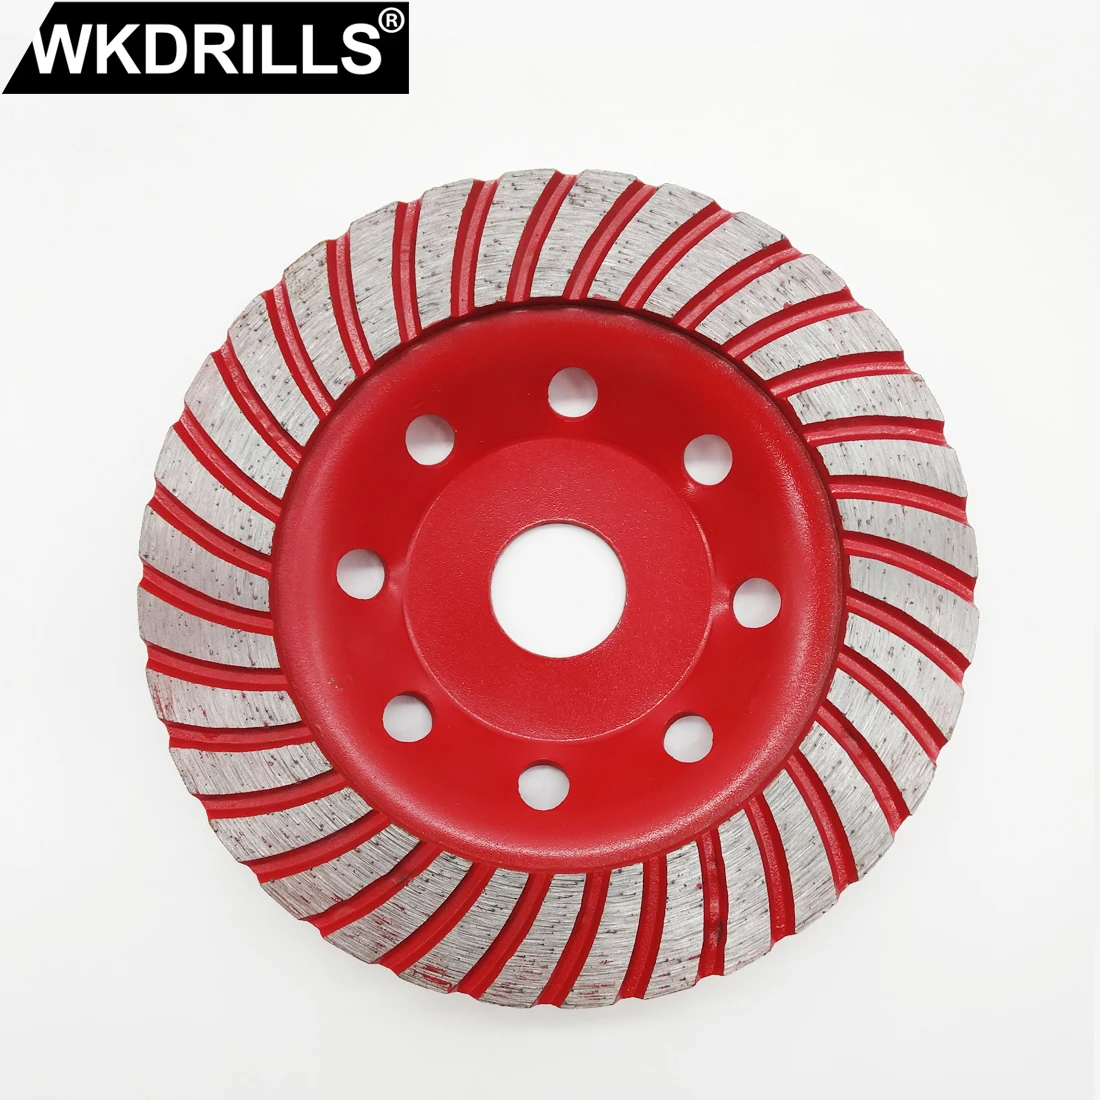 

2pcs 115mm 125mm 150mm Diamond Turbo Row Grinding Cup Wheel Grinding disc for concrete, construction material